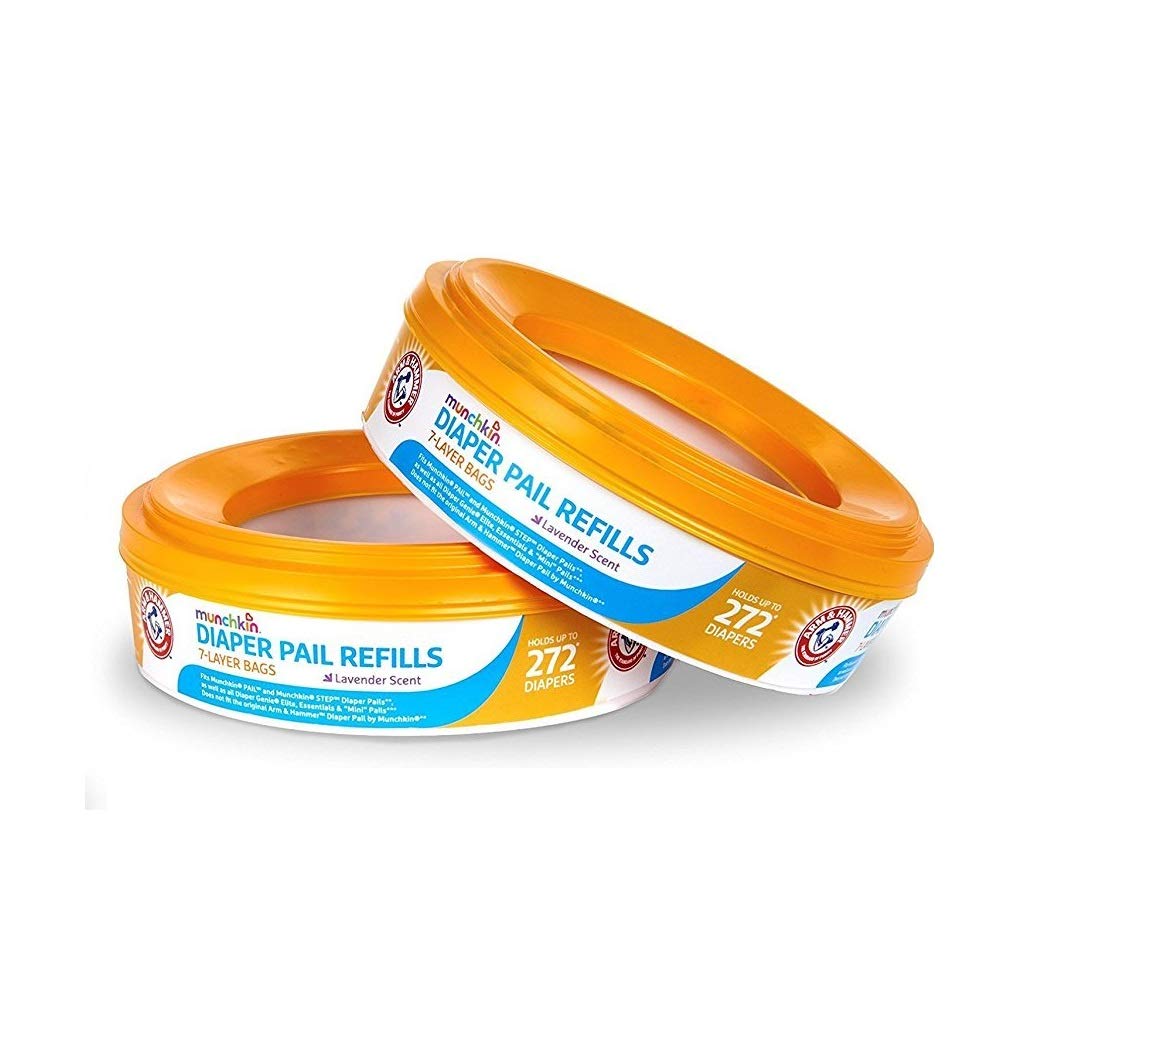 Munchkin Arm and Hammer Diaper Pail Refill Rings, 1088 Count